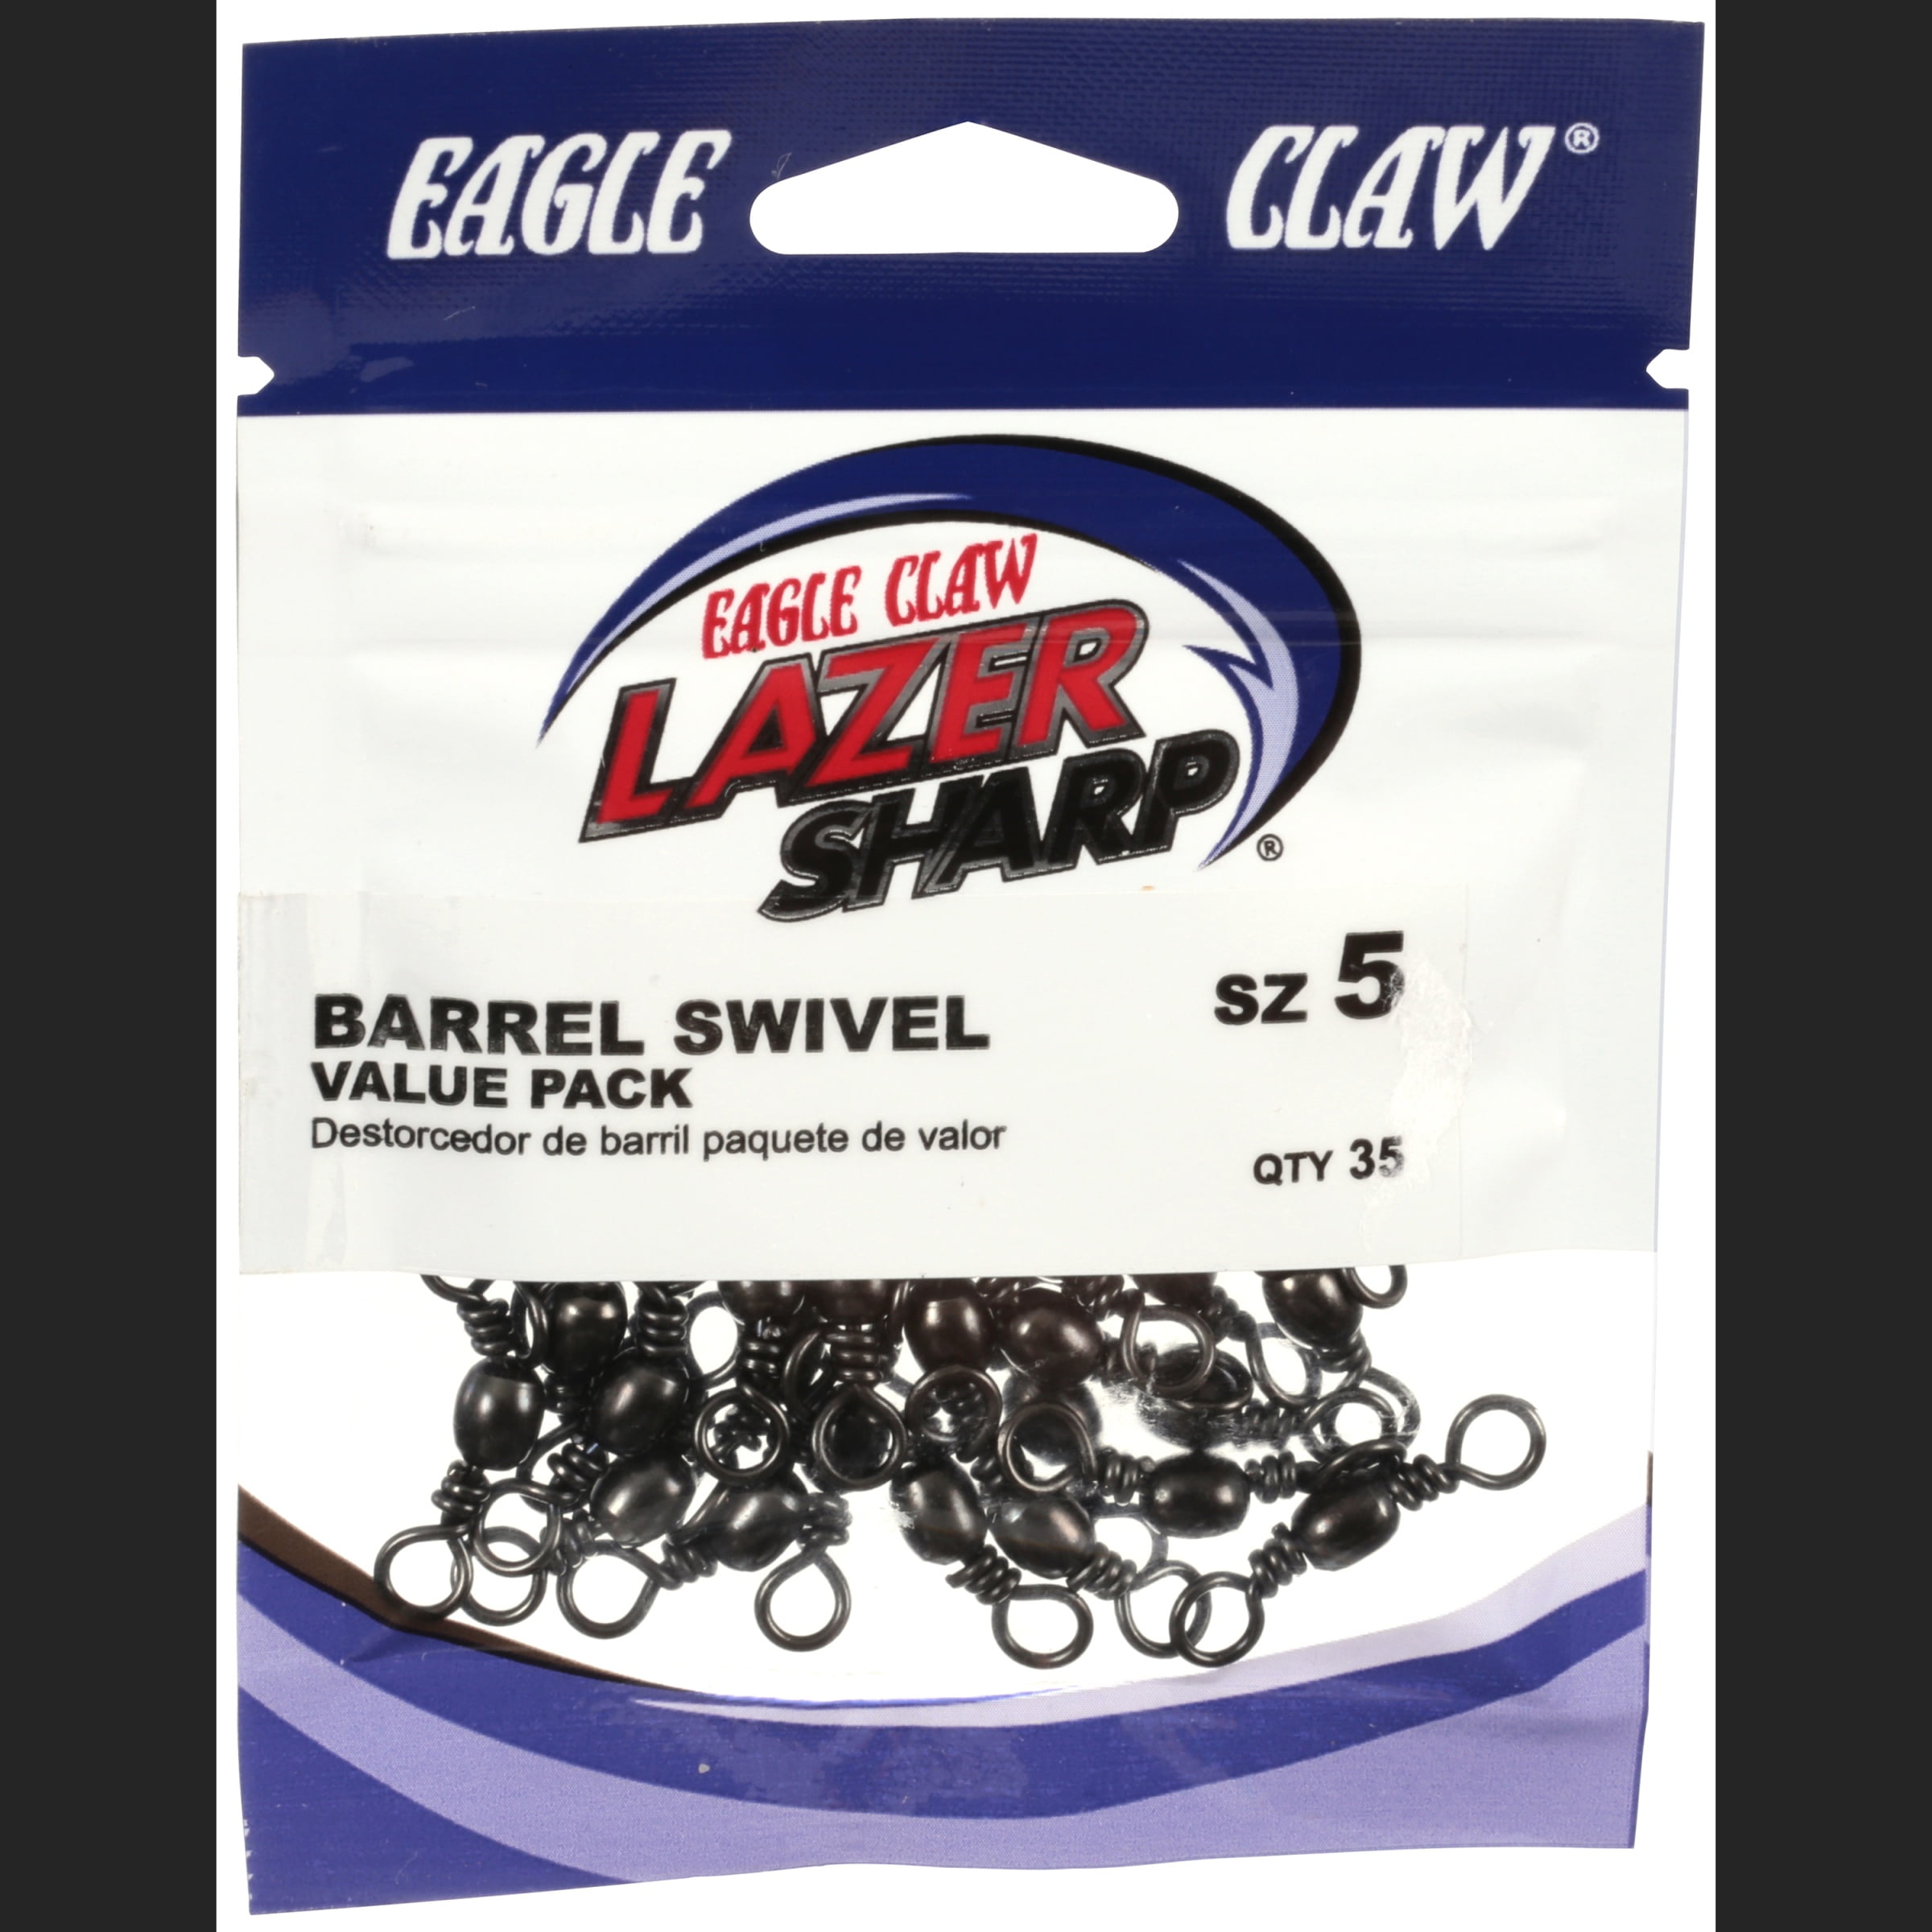 EAGLE CLAW LAZER BLACK POWER SWIVELS YOU PICK SIZE Fishing Tackle 100 